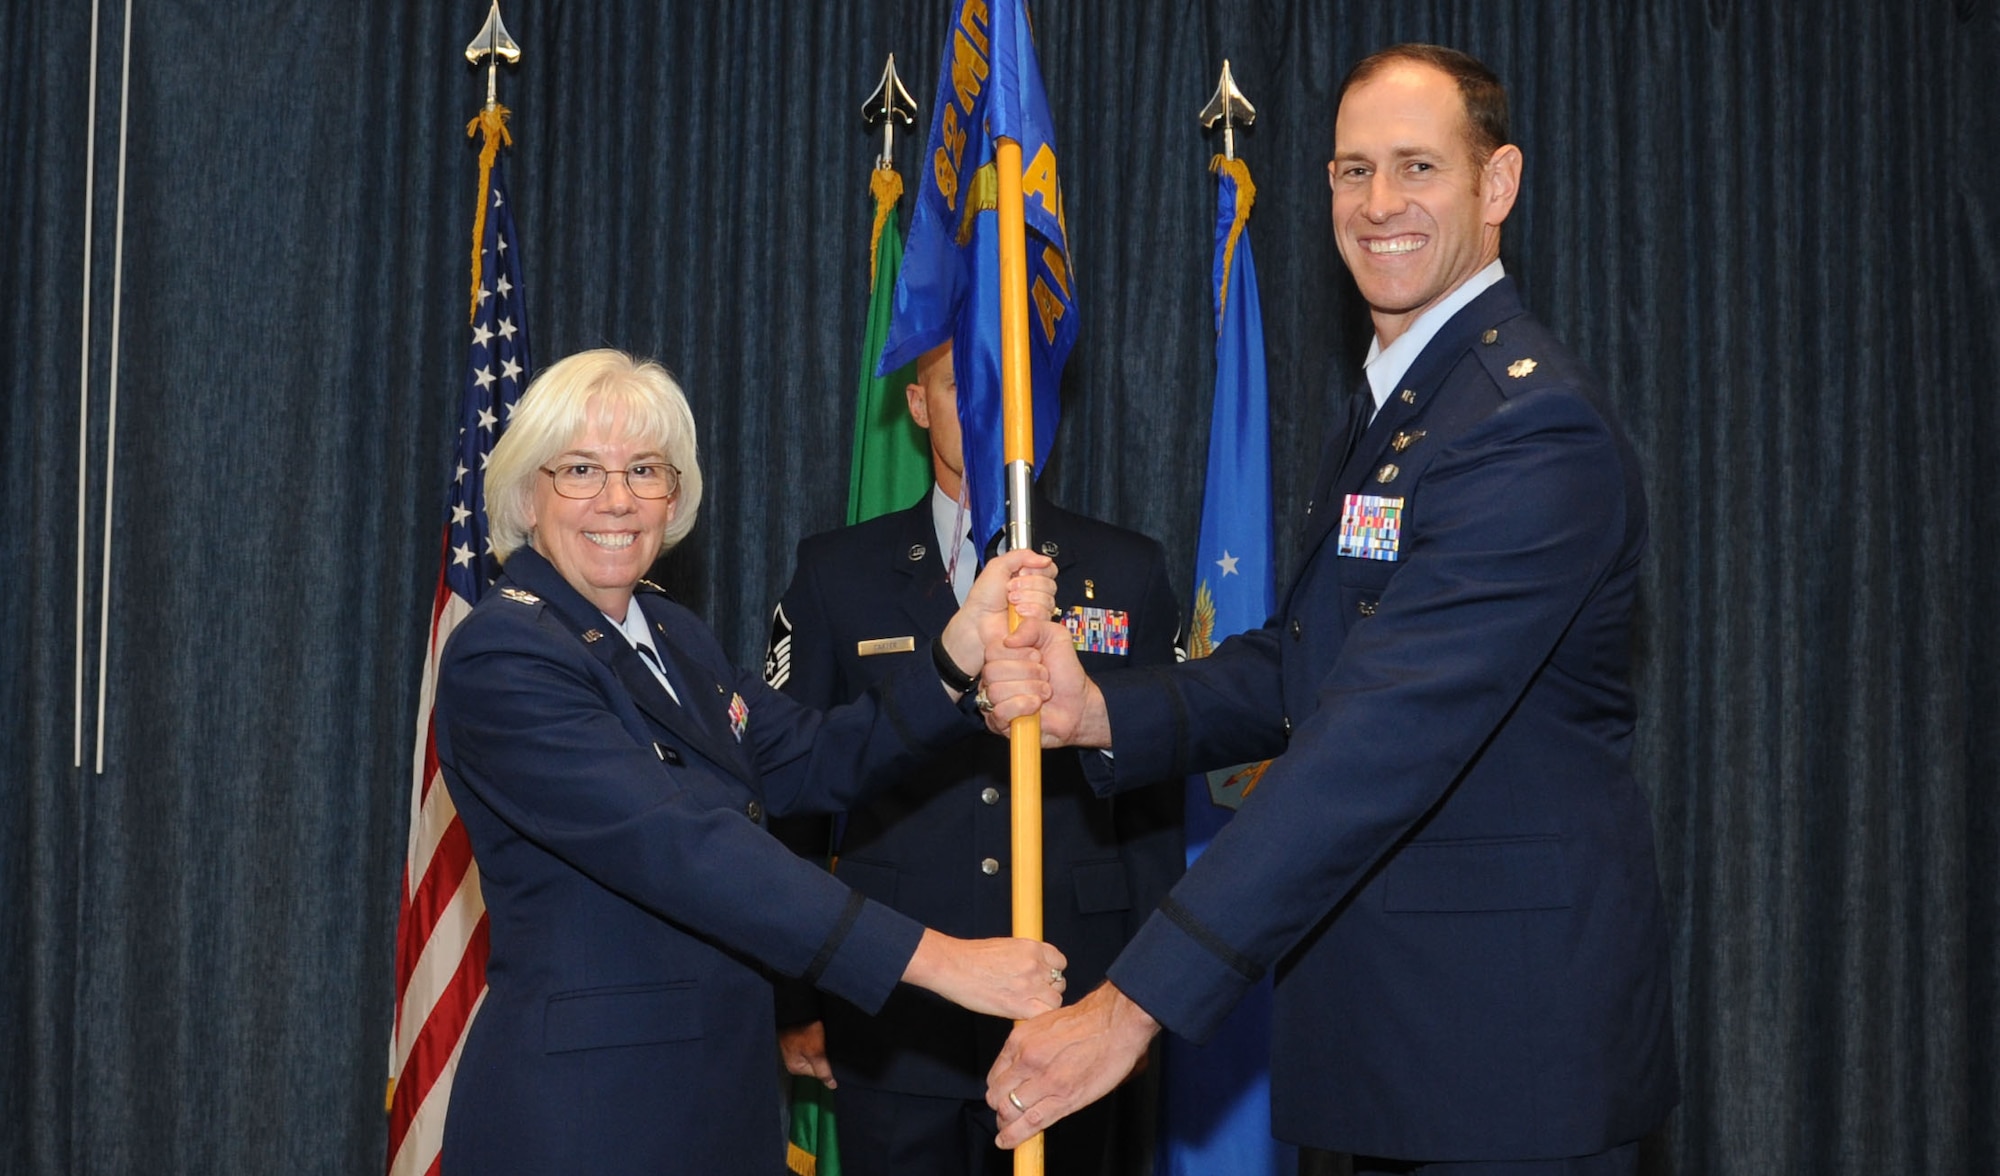 Col. Margaret Carey, 92nd Medical Group commander, passes the 92nd Aerospace Medicine Squadron guidon to Lt. Col. Kenneth Bode, 92nd AMDS commander, during the assumption of command ceremony July 27, 2016, at Fairchild Air Force Base, Wash. Bode was previously commander of 8th Medical Operations Squadron, Kunsan Air Base, South Korea. (U.S. Air Force photo/Senior Airman Sam Fogleman)